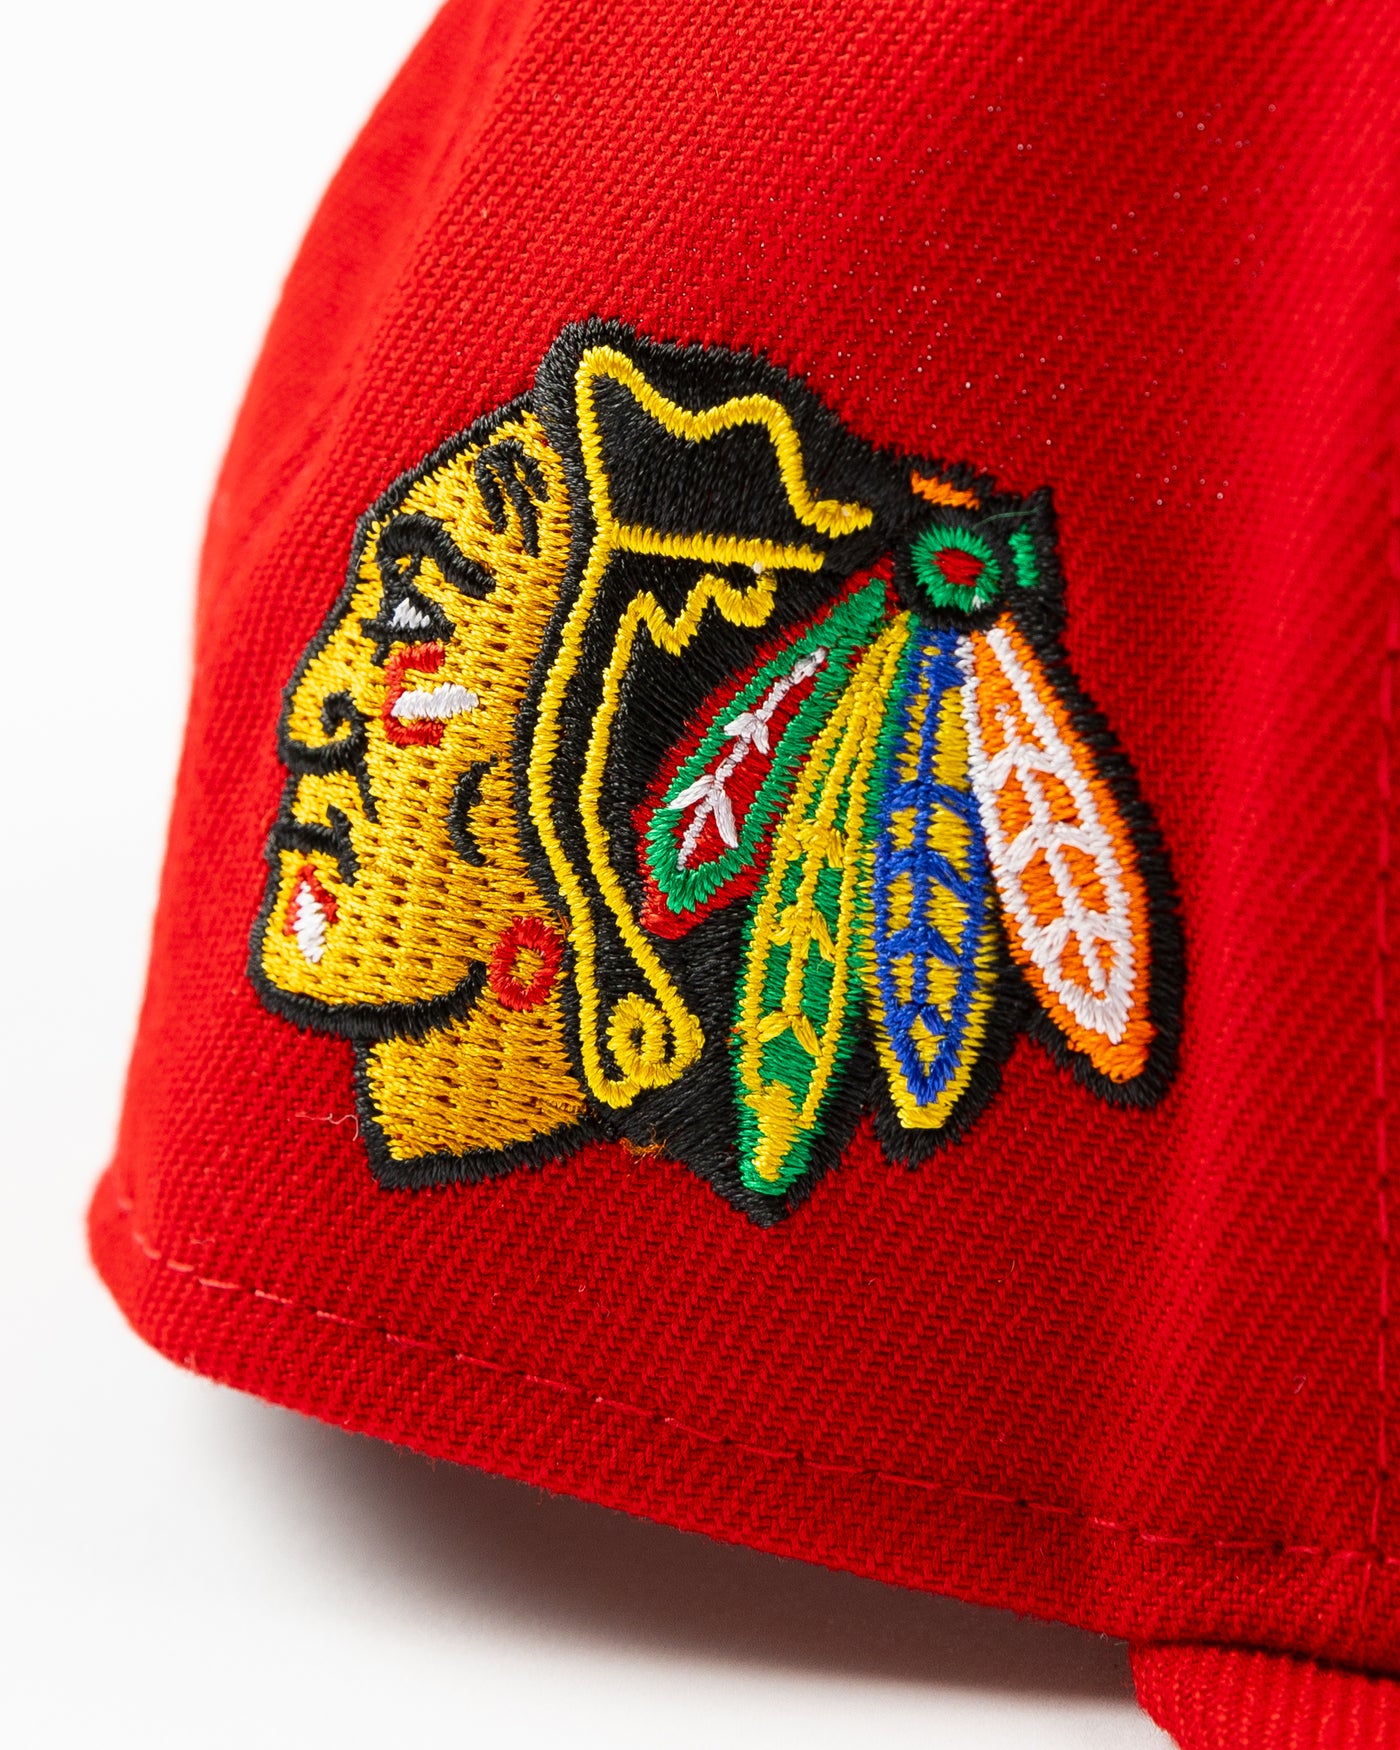 red youth New Era snapback cap with Chicago Blackhawks embroidered wordmark and primary logo on right side - alt detail lay flat